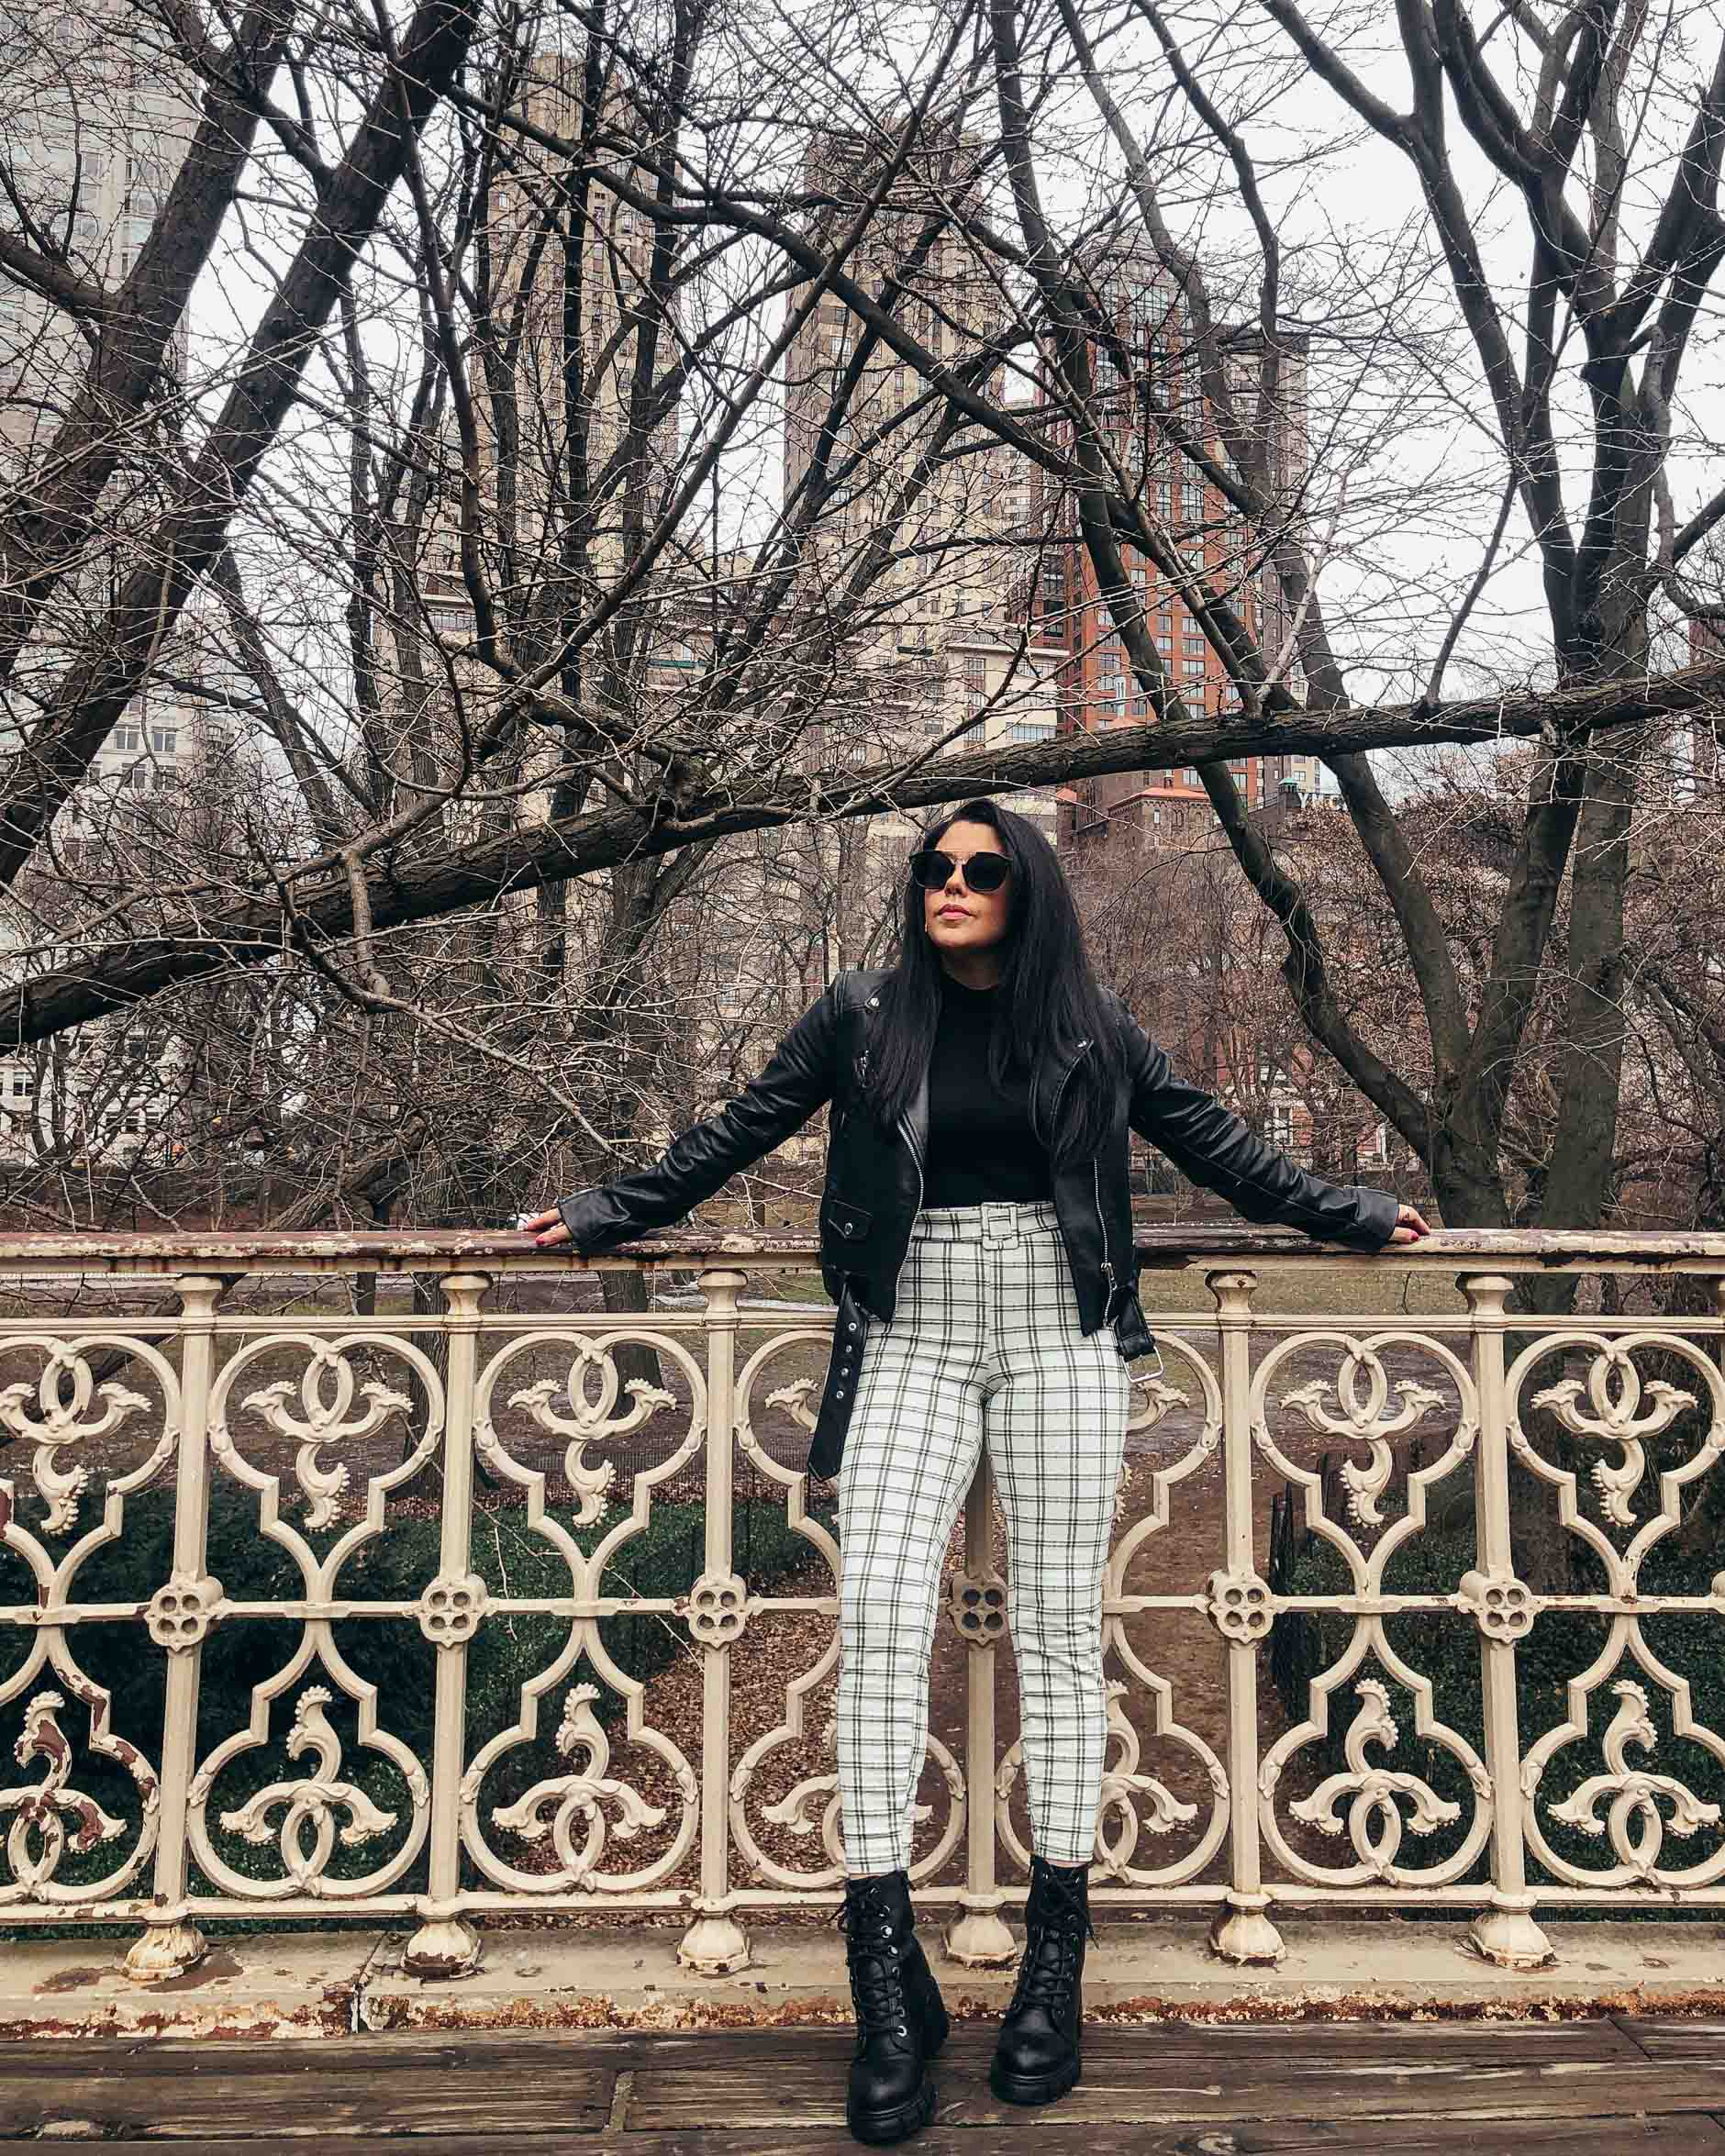 naty michele at central park wearing combat boots and leather jacket